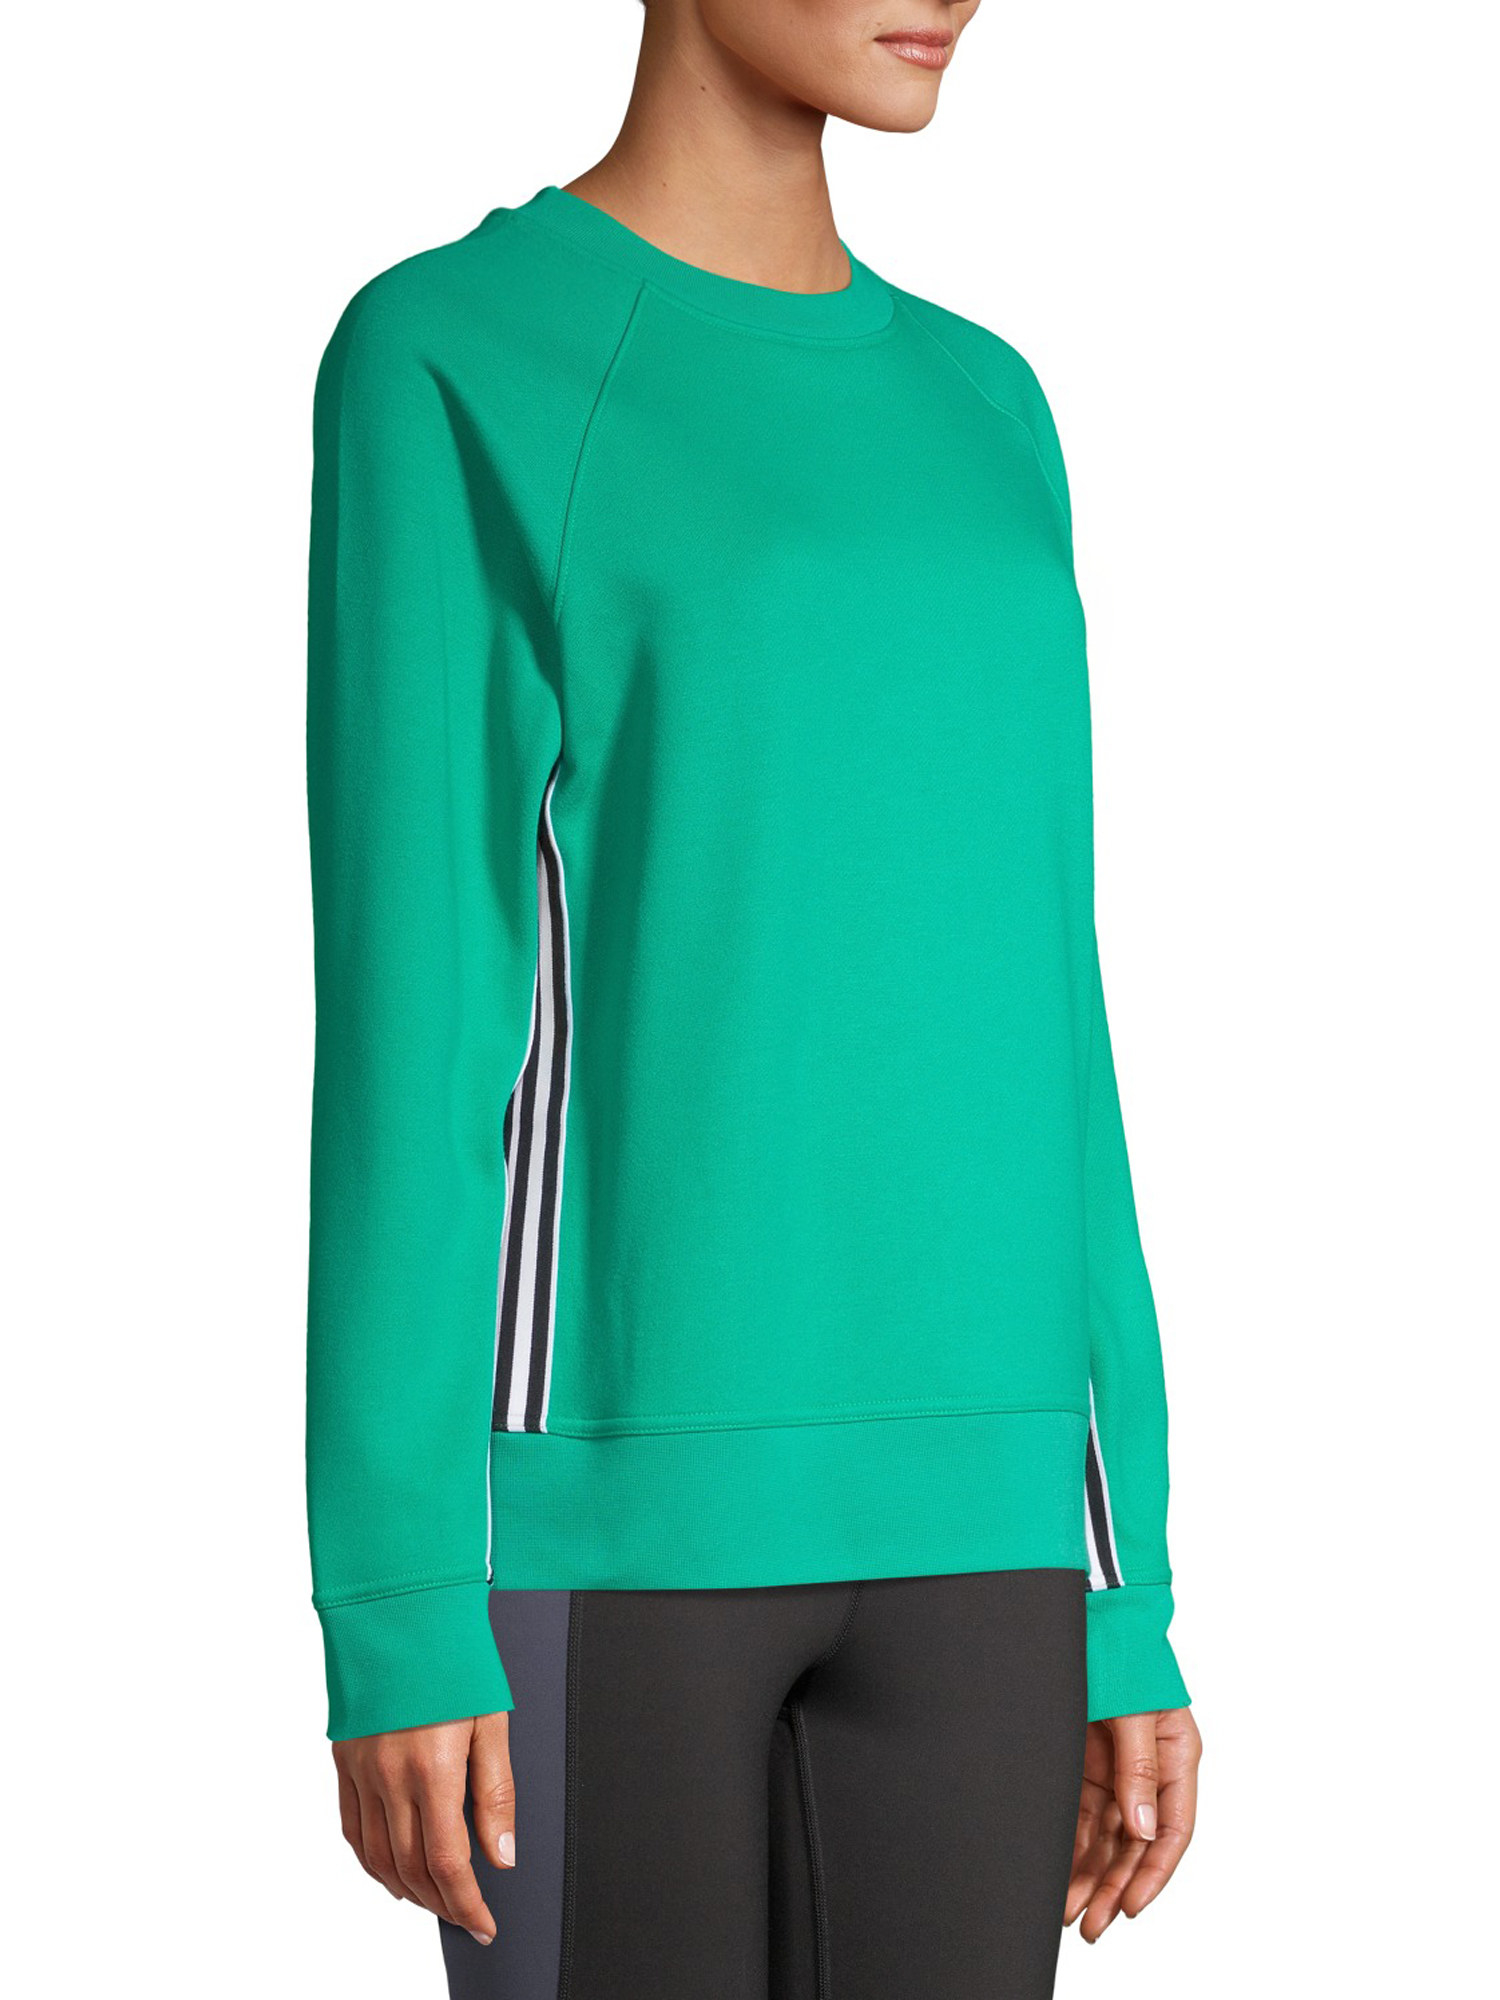 The green sweatshirt with black and white side stripes